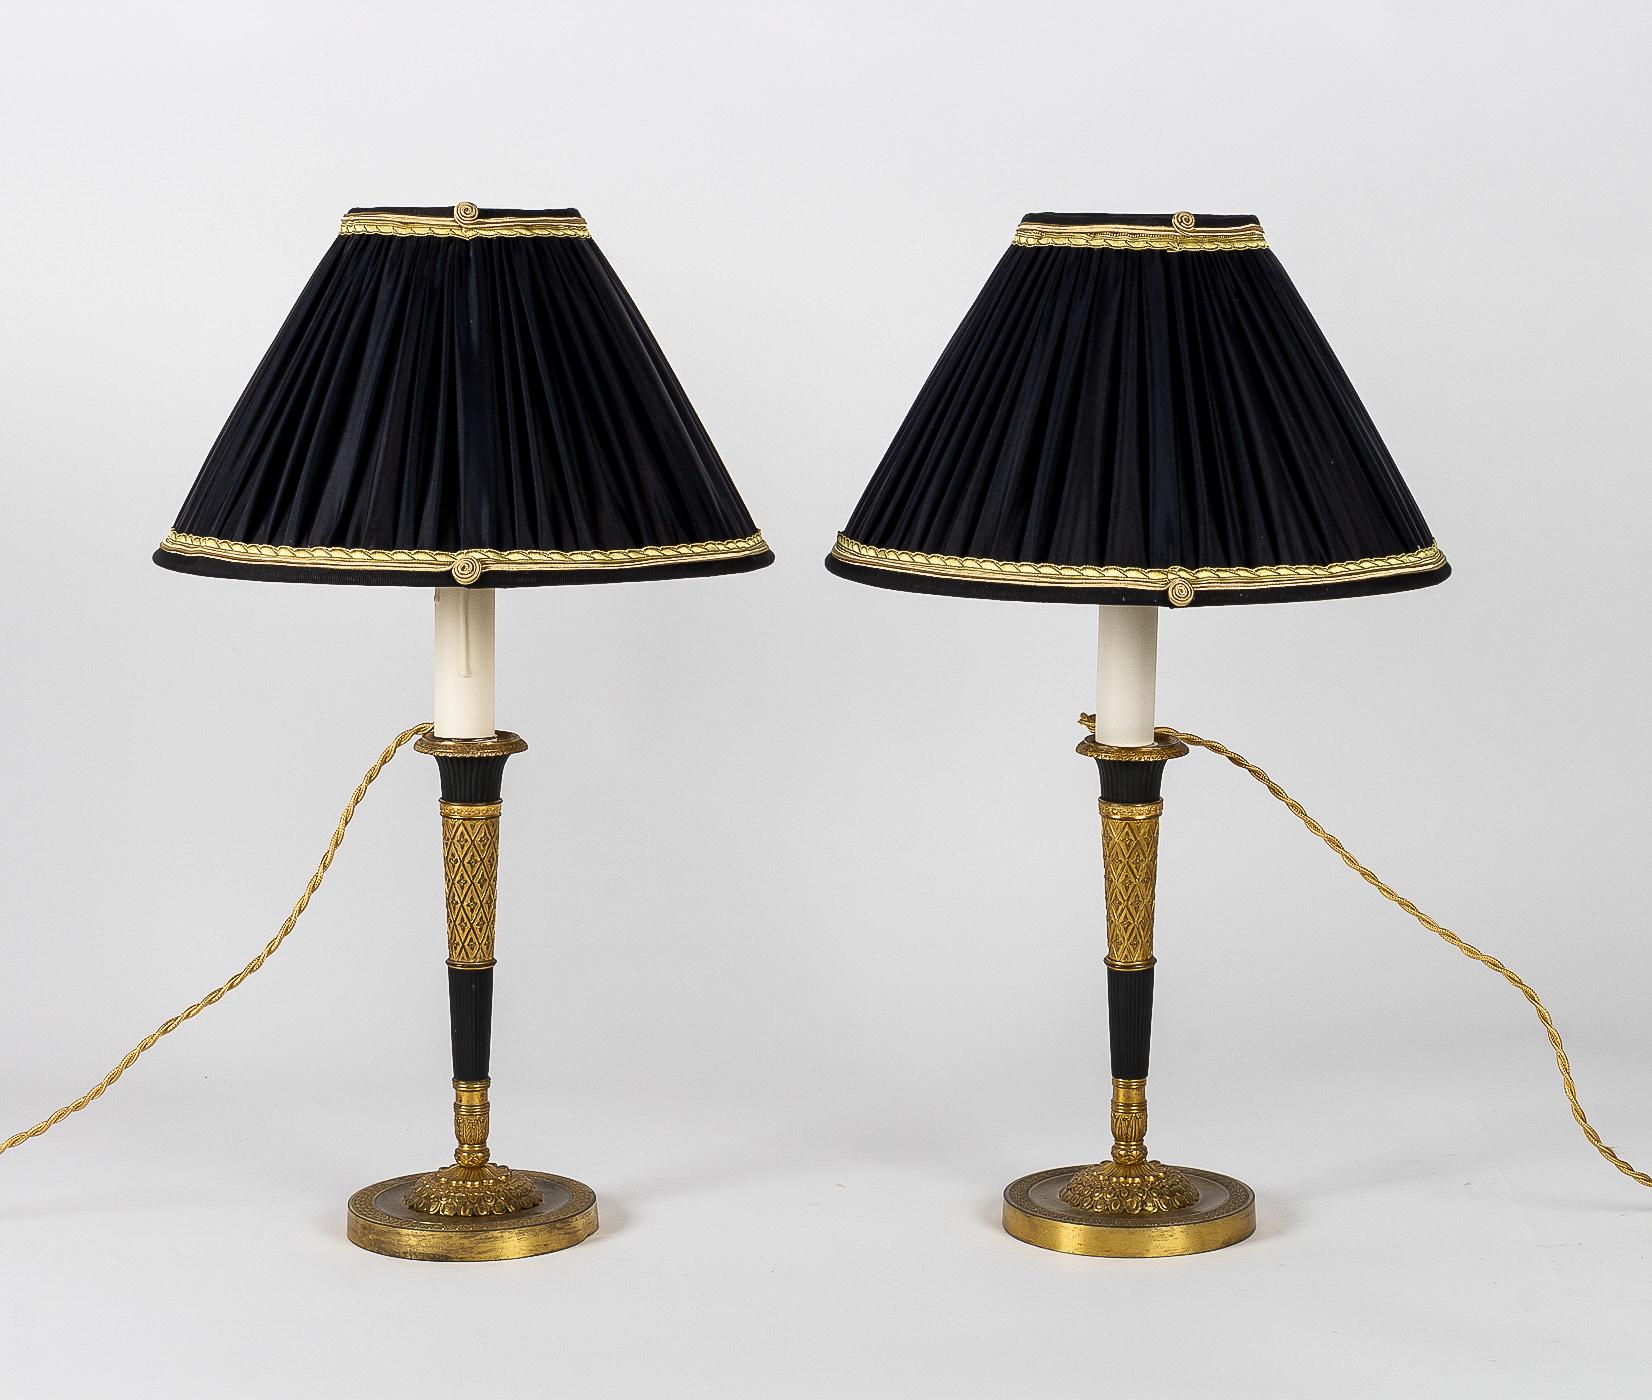 French Directoire period pair of French candlesticks converted in table-lamps, circa 1798.

A rare, elegant and decorative pair of gilt bronze and patinated-bronze candlesticks, nicely chiseled of stars.

Beautiful French work late 18th century,